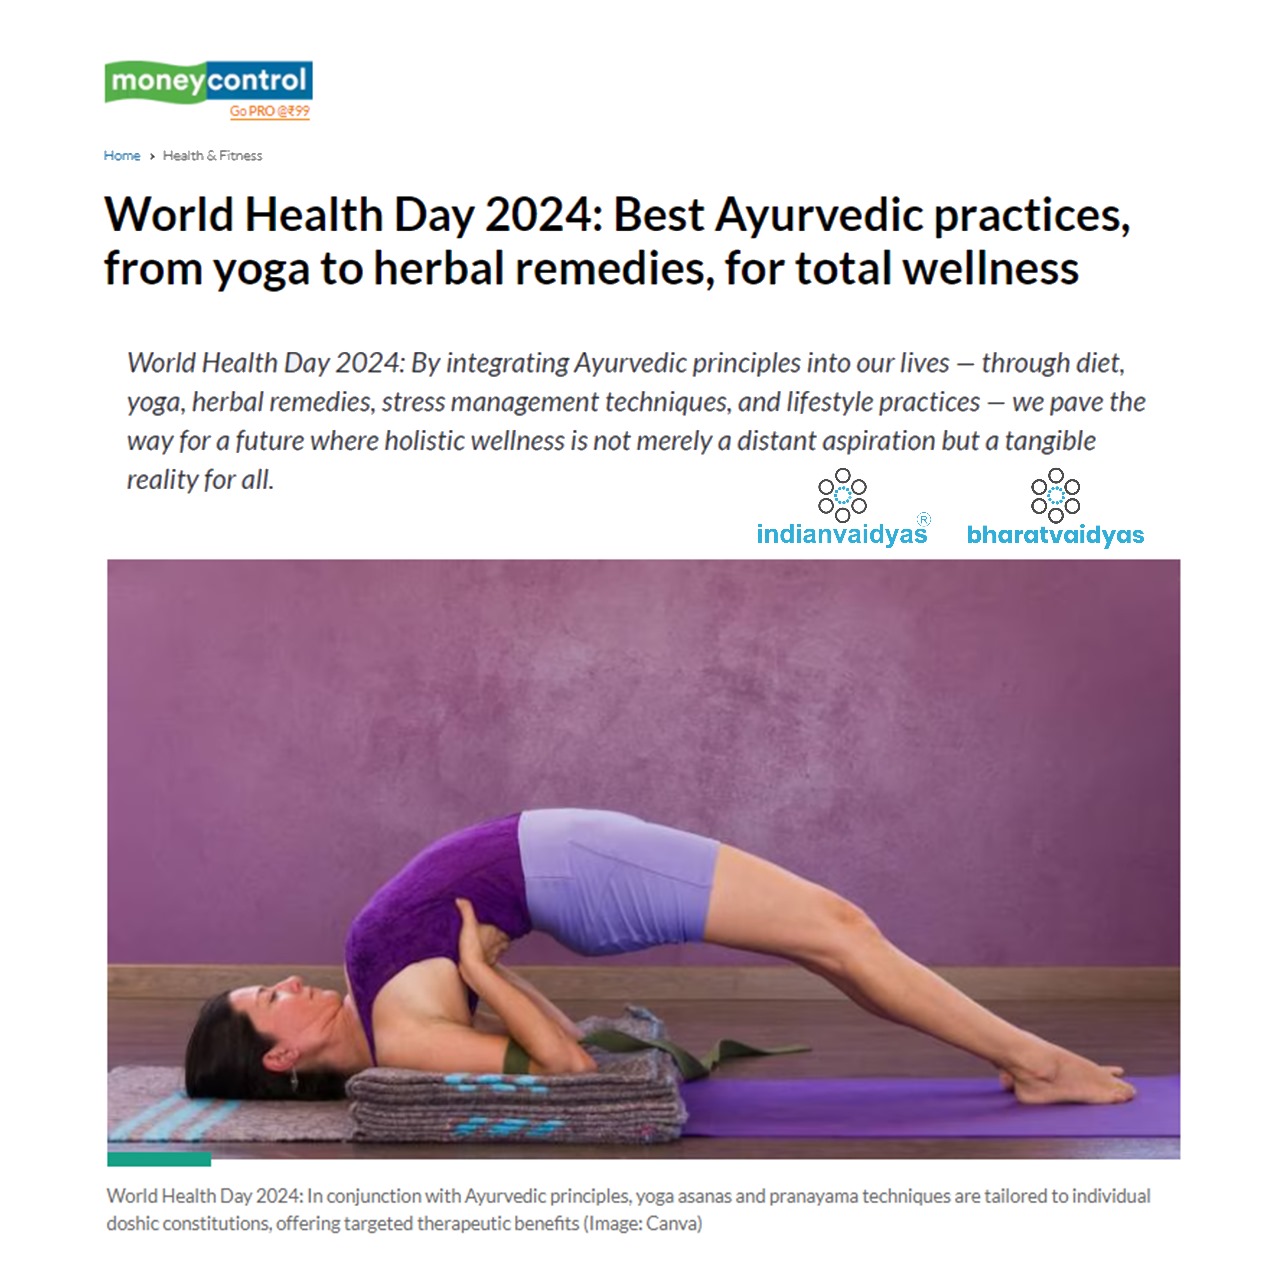 World Health Day 2024: Best Ayurvedic practices, from yoga to herbal remedies, for total wellness